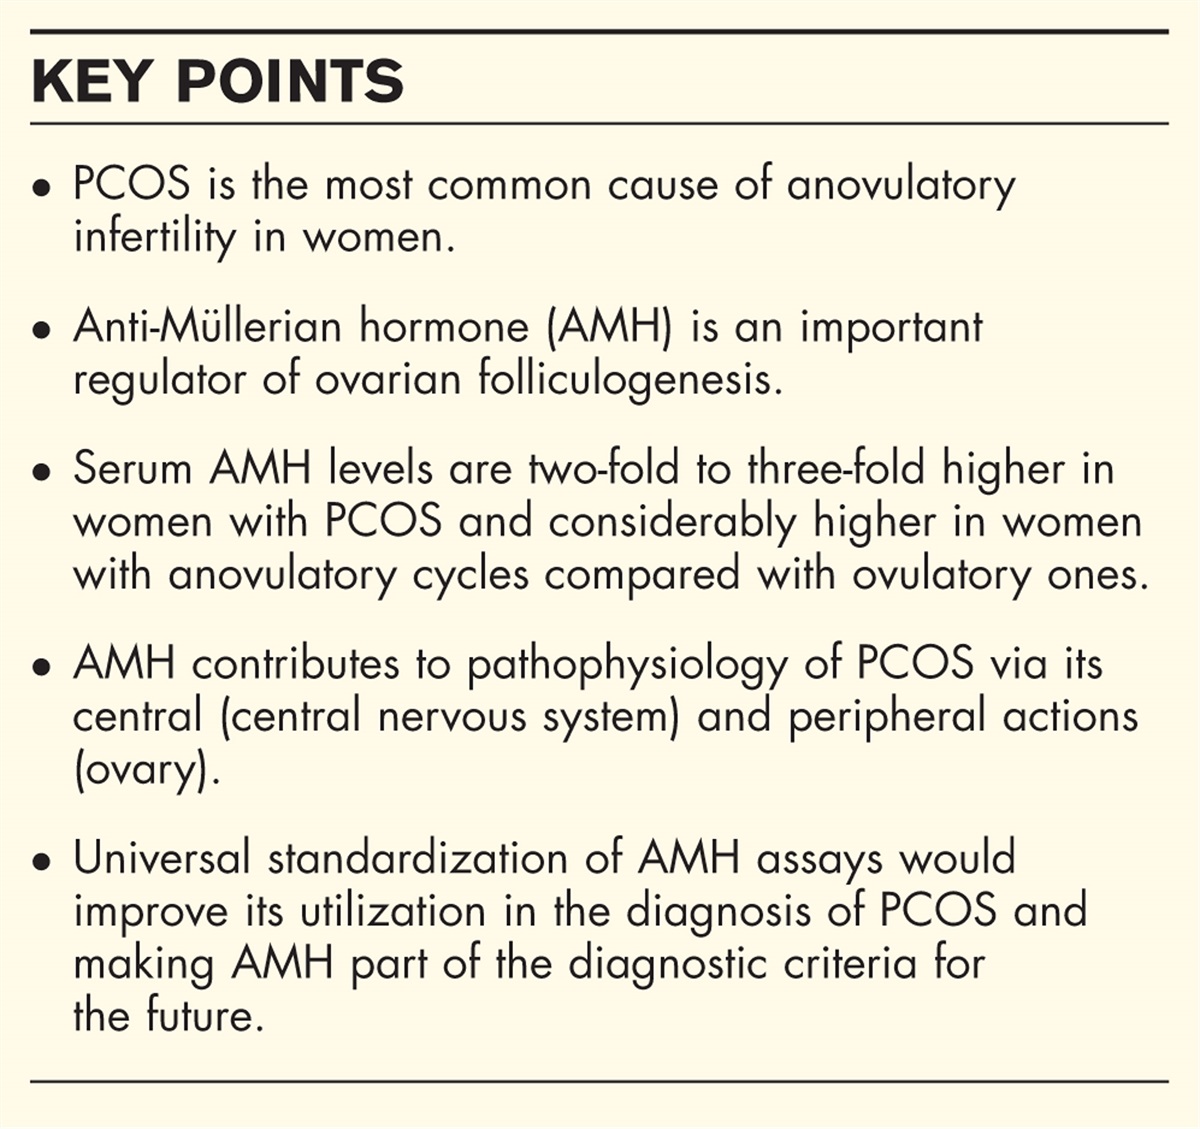 Use of anti-Müllerian hormone for understanding ovulatory dysfunction in polycystic ovarian syndrome